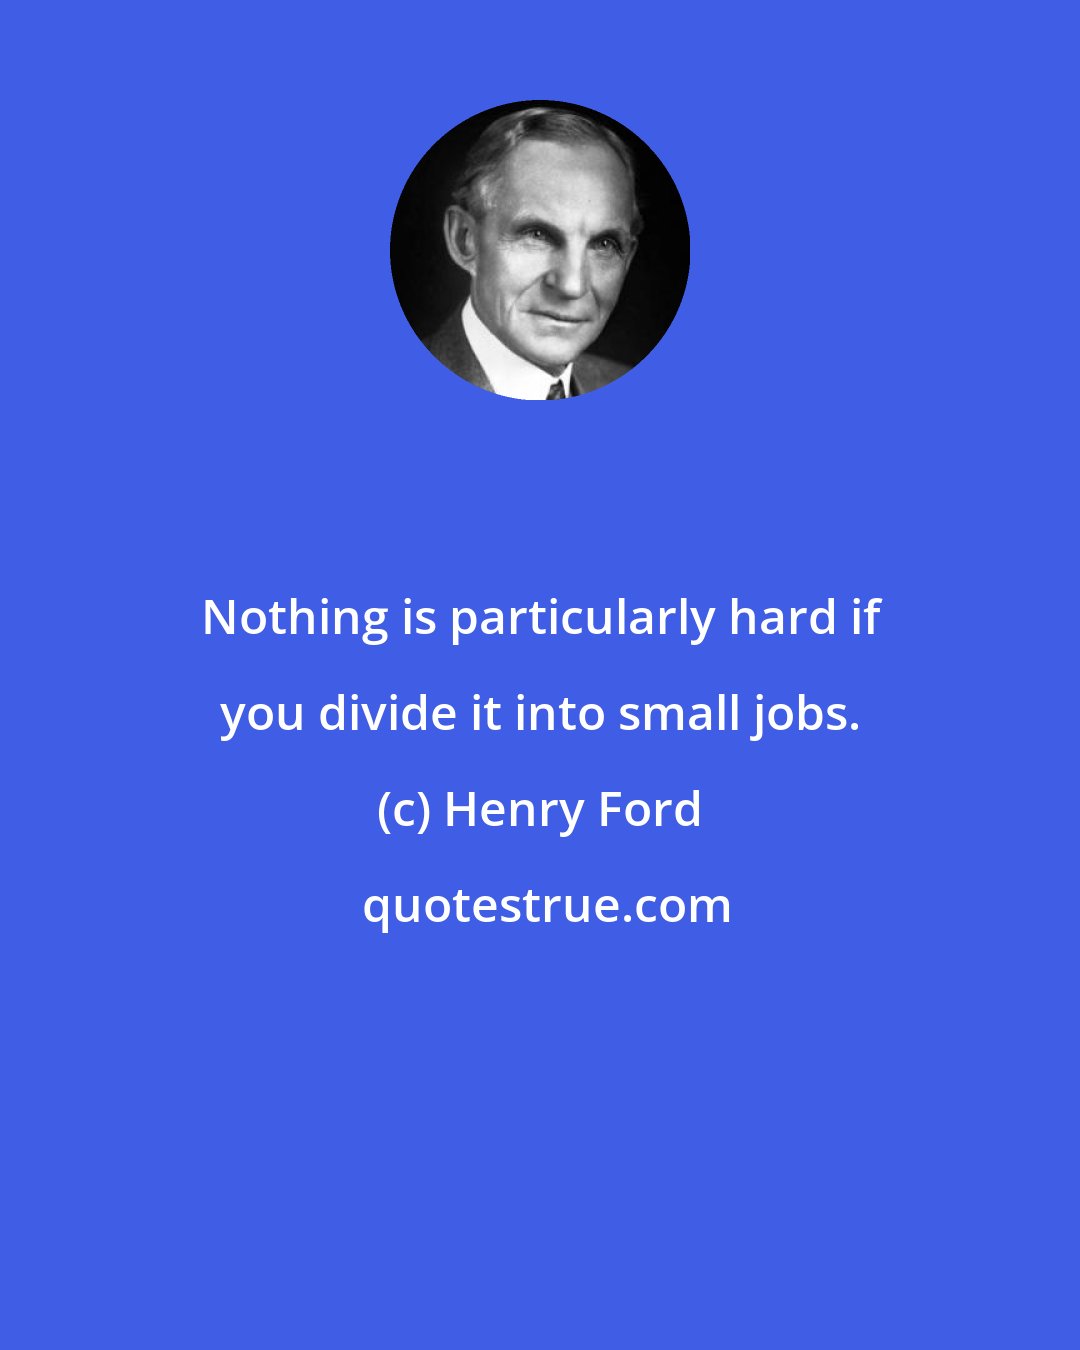 Henry Ford: Nothing is particularly hard if you divide it into small jobs.